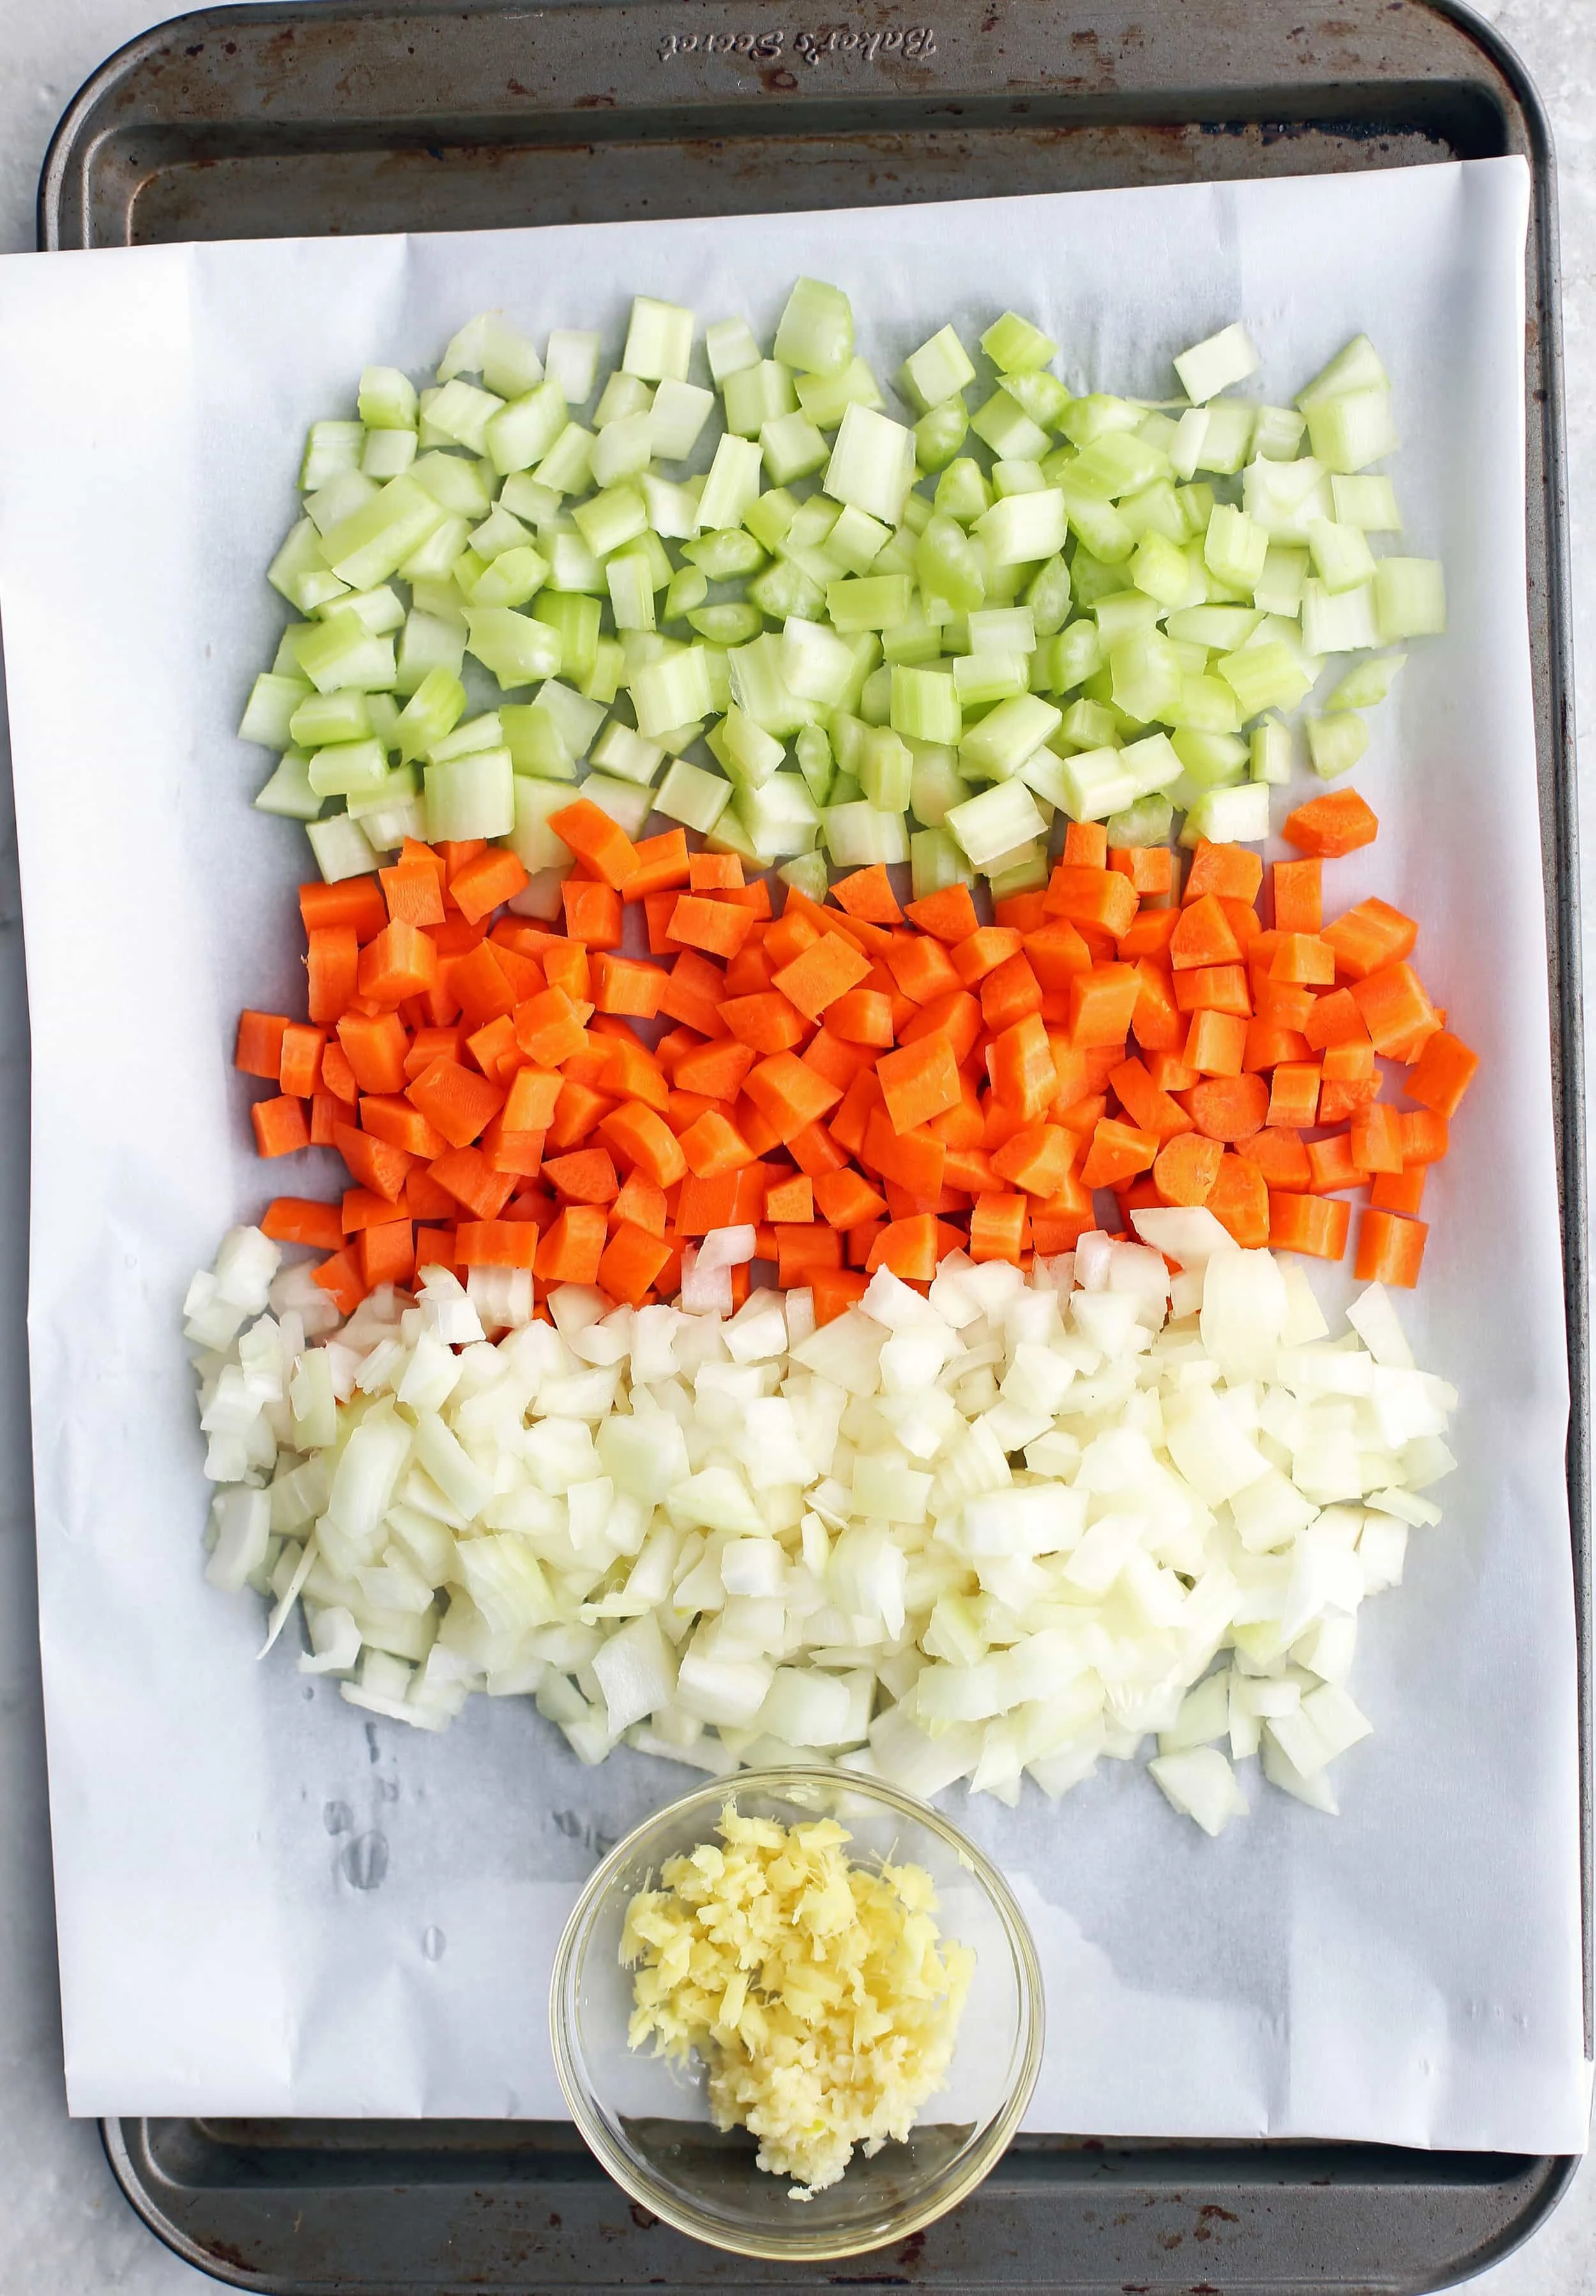 Diced onions, carrots, and celery in a baking sheet; minced garlic and ginger in a small bowl.